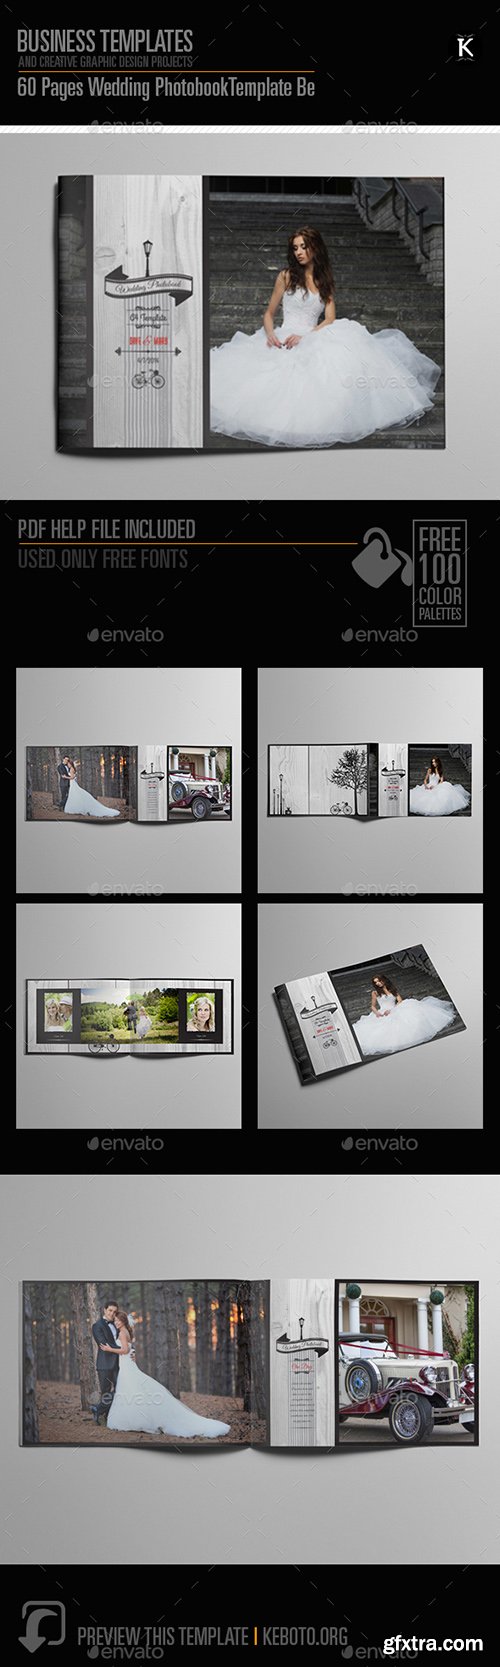 Graphicriver 60 Pages Wedding PhotobookTemplate Be 8646157